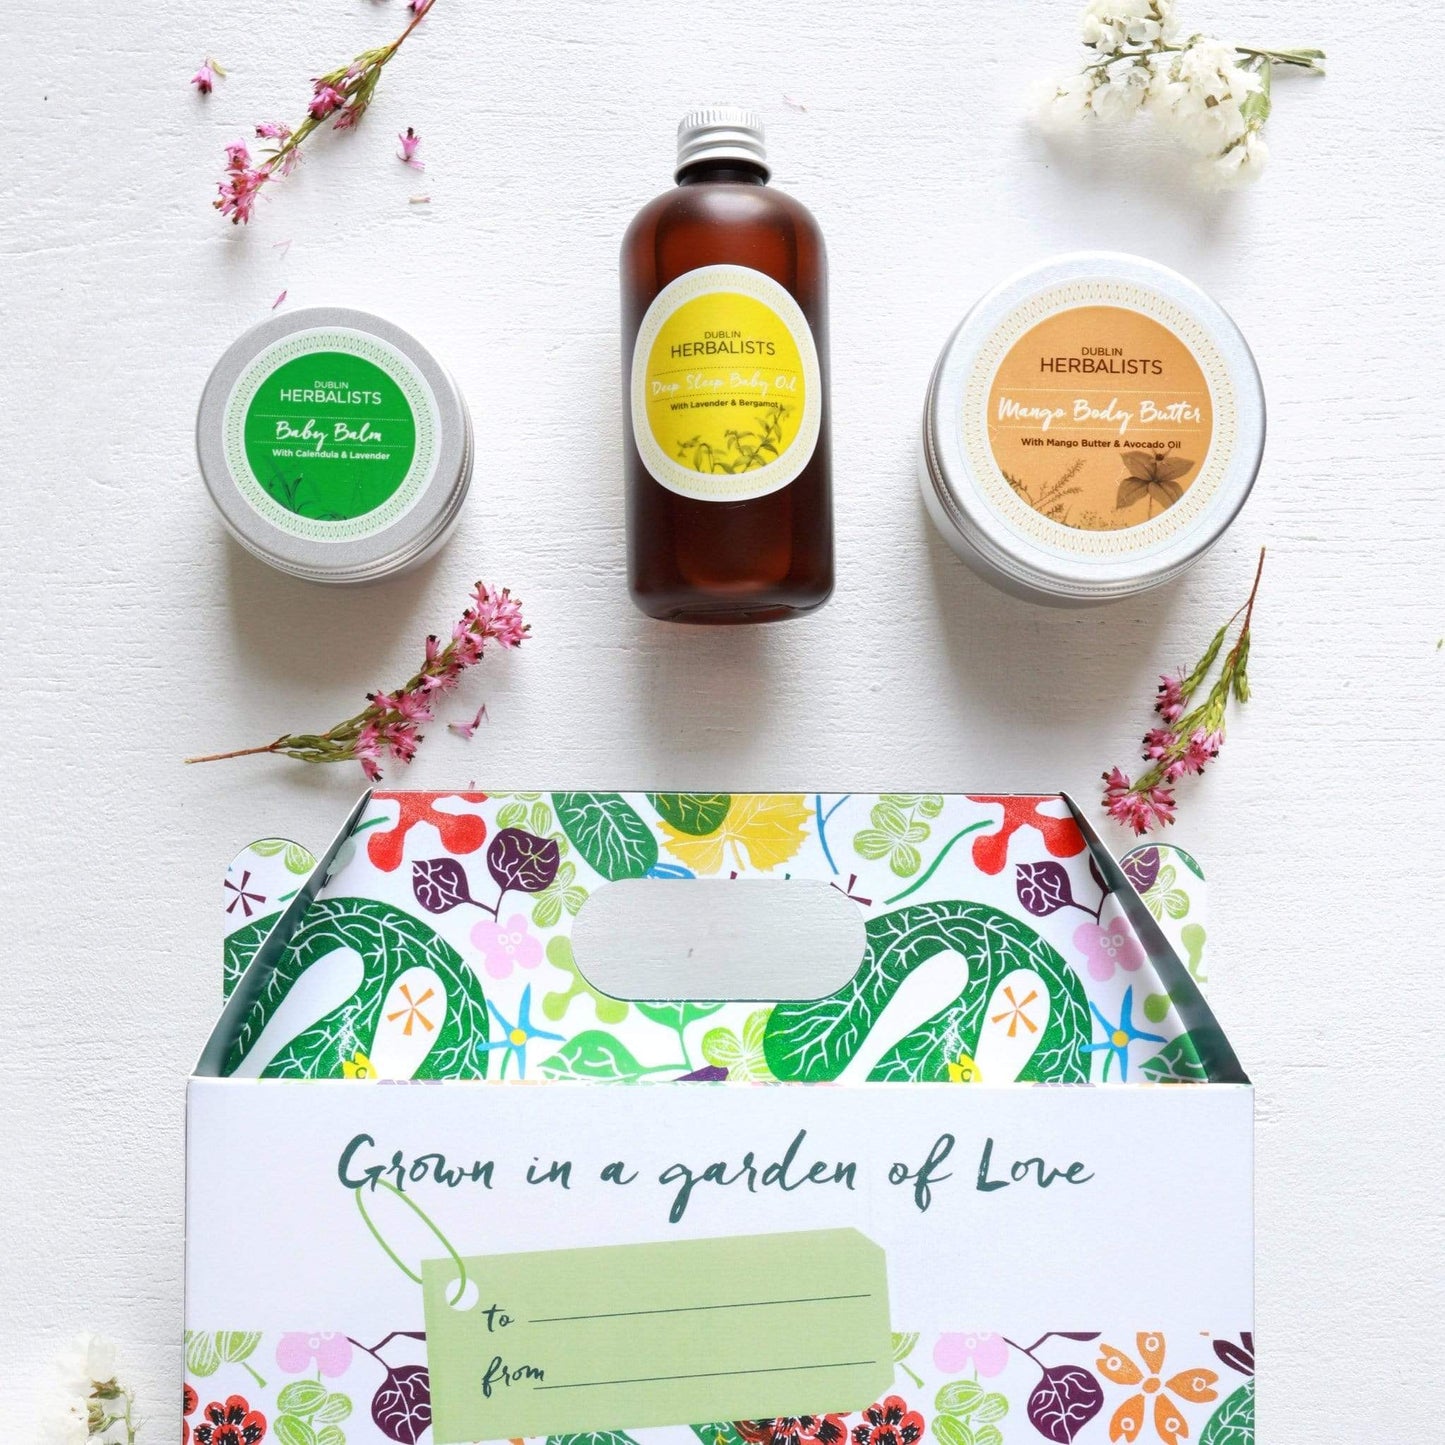 Dublin Herbalists Gift Box New Baby Collection Gift Set - Dublin Herbalists